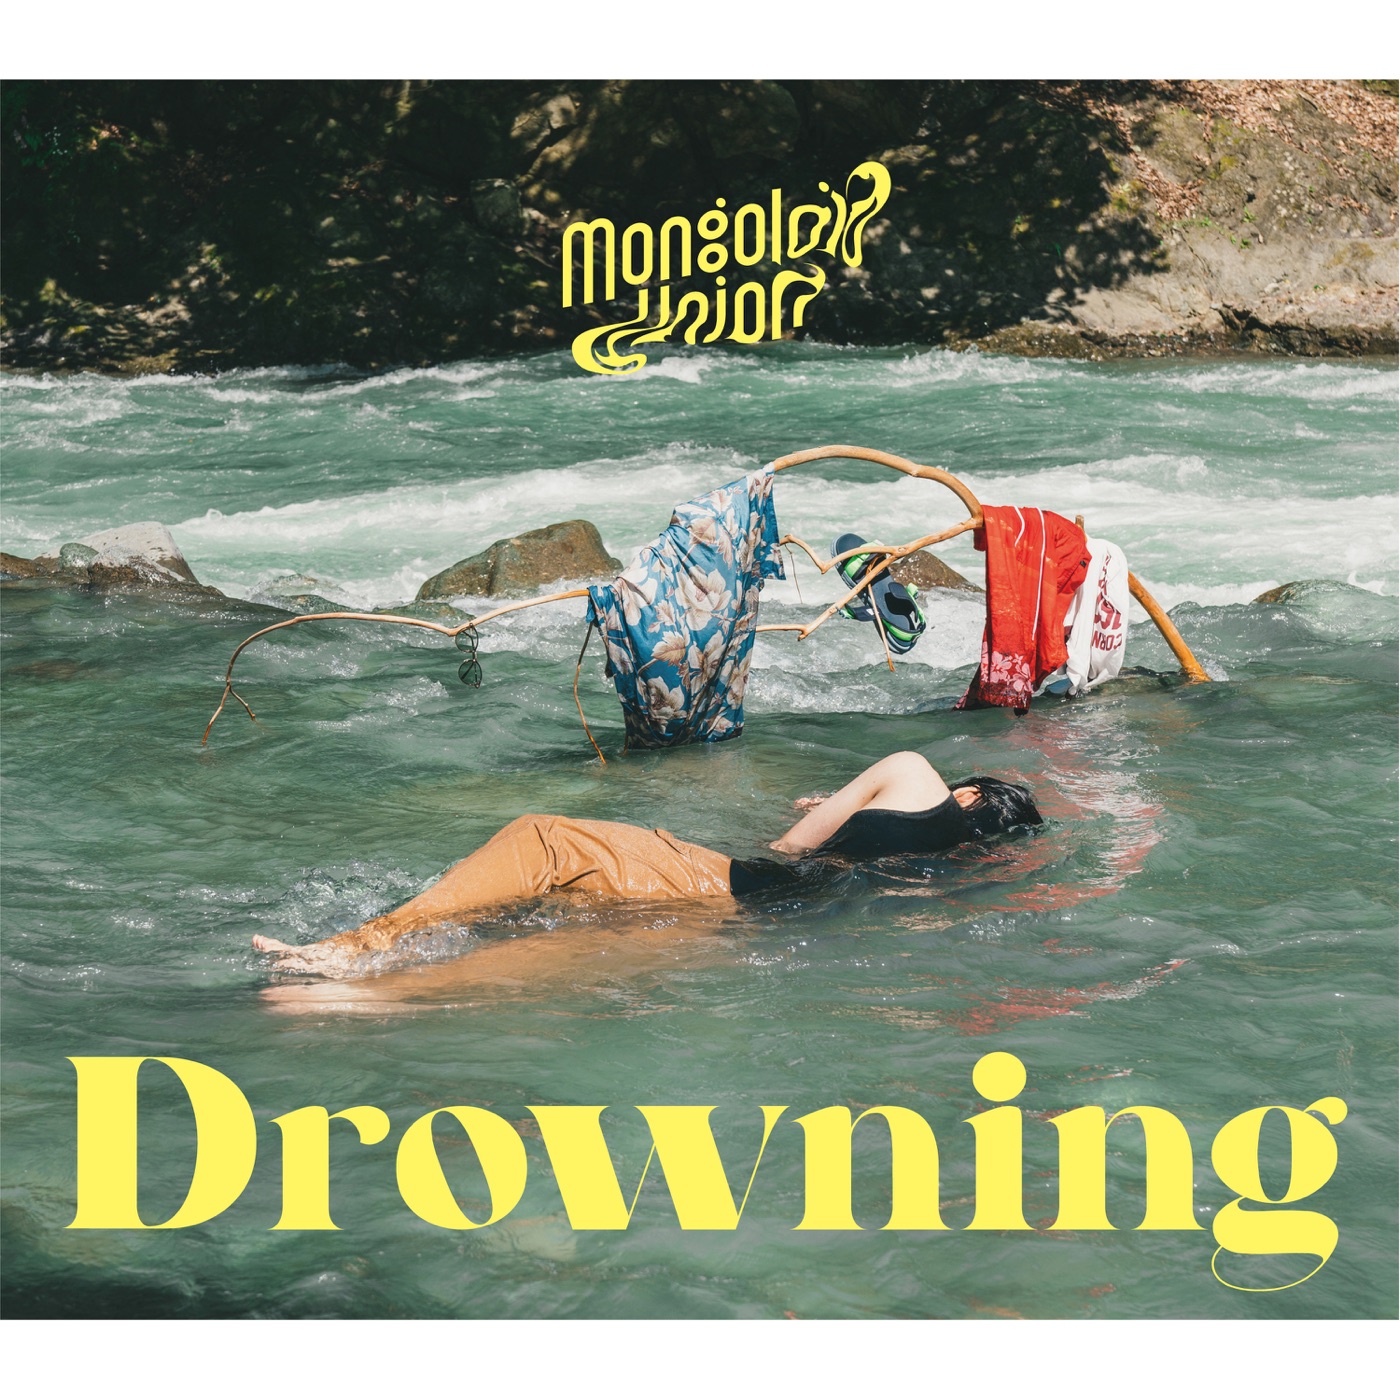 Drowning by Mongoloid Union